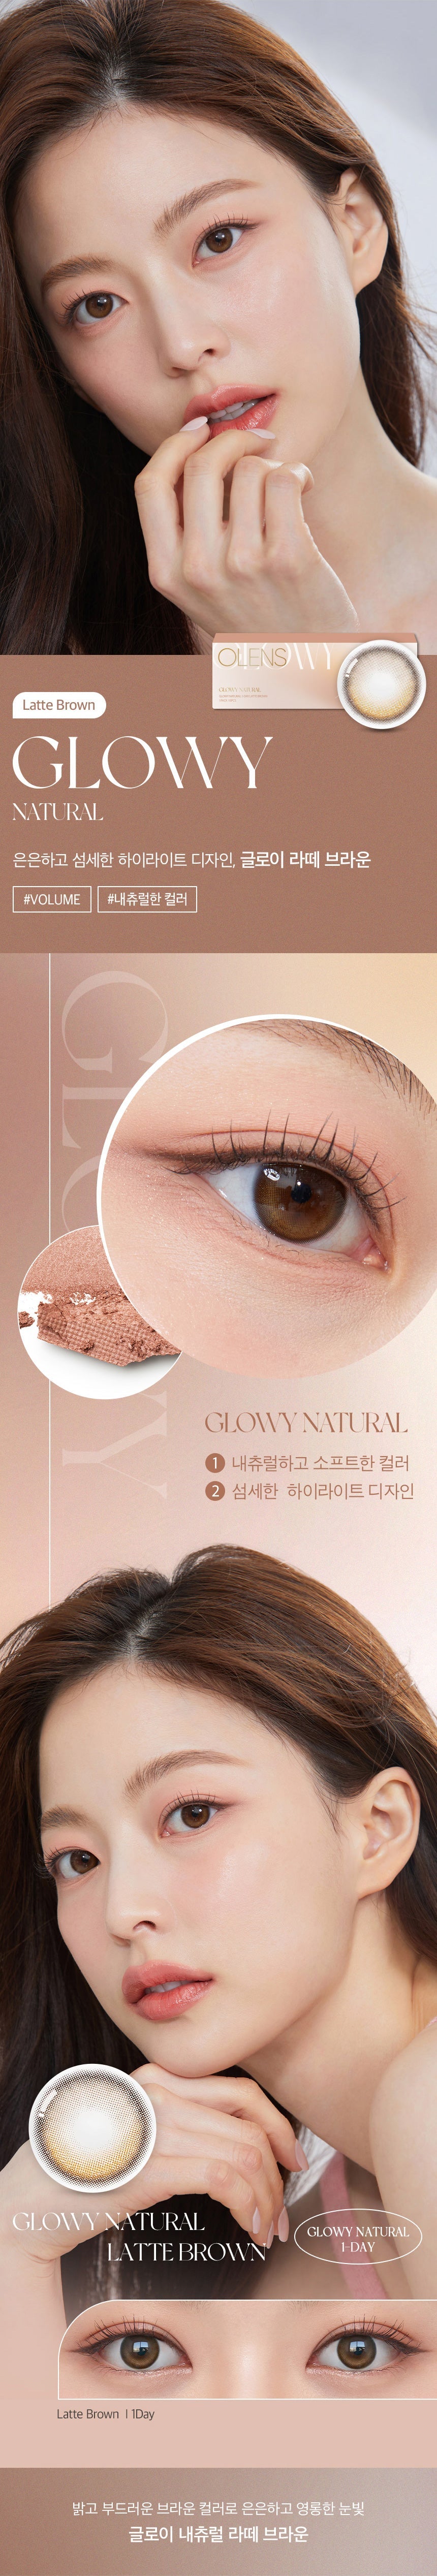 O-Lens Glowy Natural Latte Brown | Daily 10 Pairs